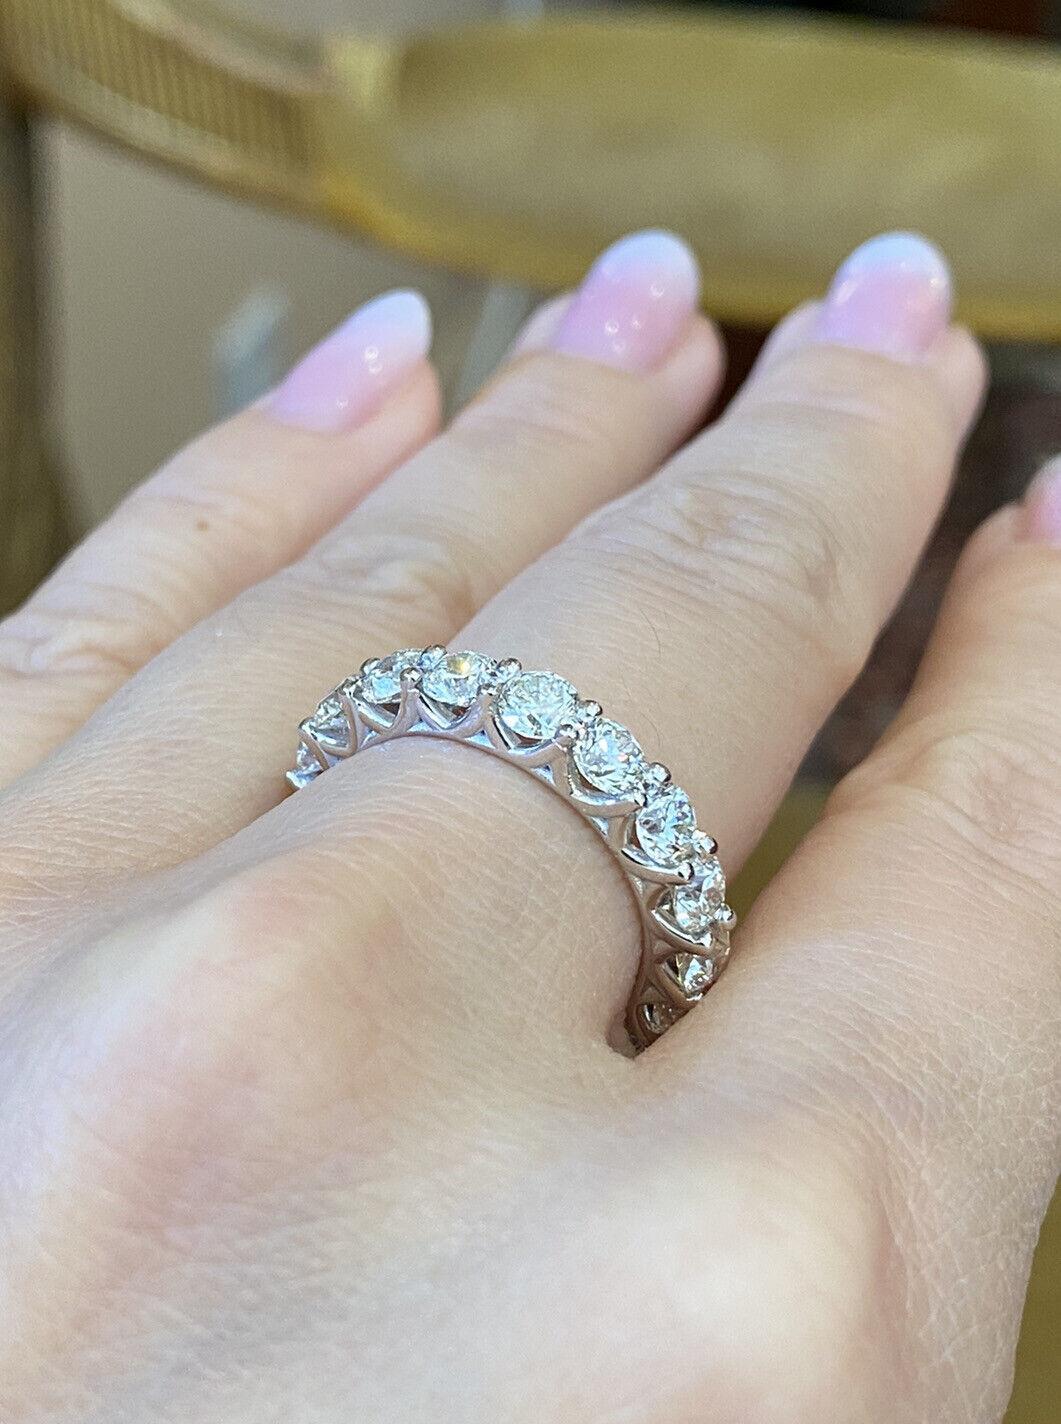 Round Diamond Eternity Band Ring 4.25 Carat Total Weight in 18k White Gold In Excellent Condition For Sale In La Jolla, CA